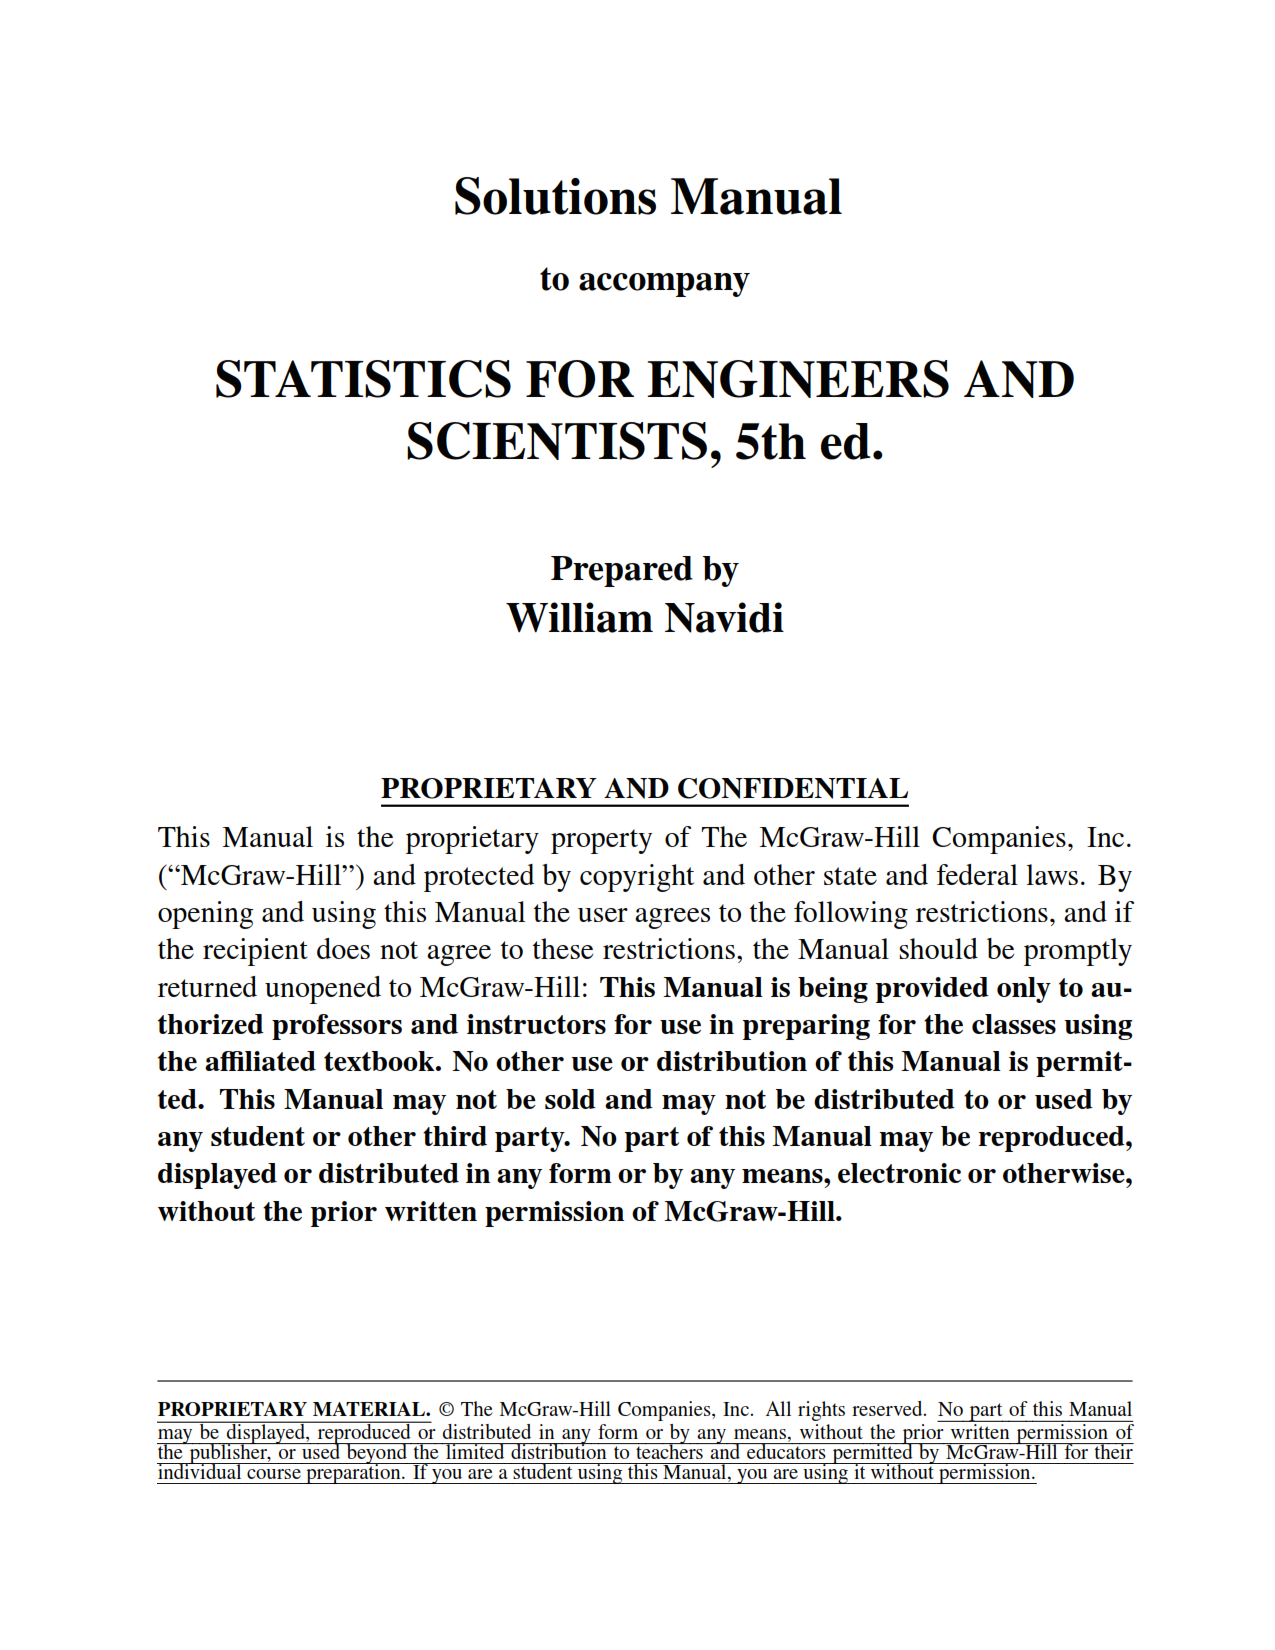 Download free Statistics for Engineers and Scientists William Navidi 5th edition solutions manual pdf | gioumeh solution